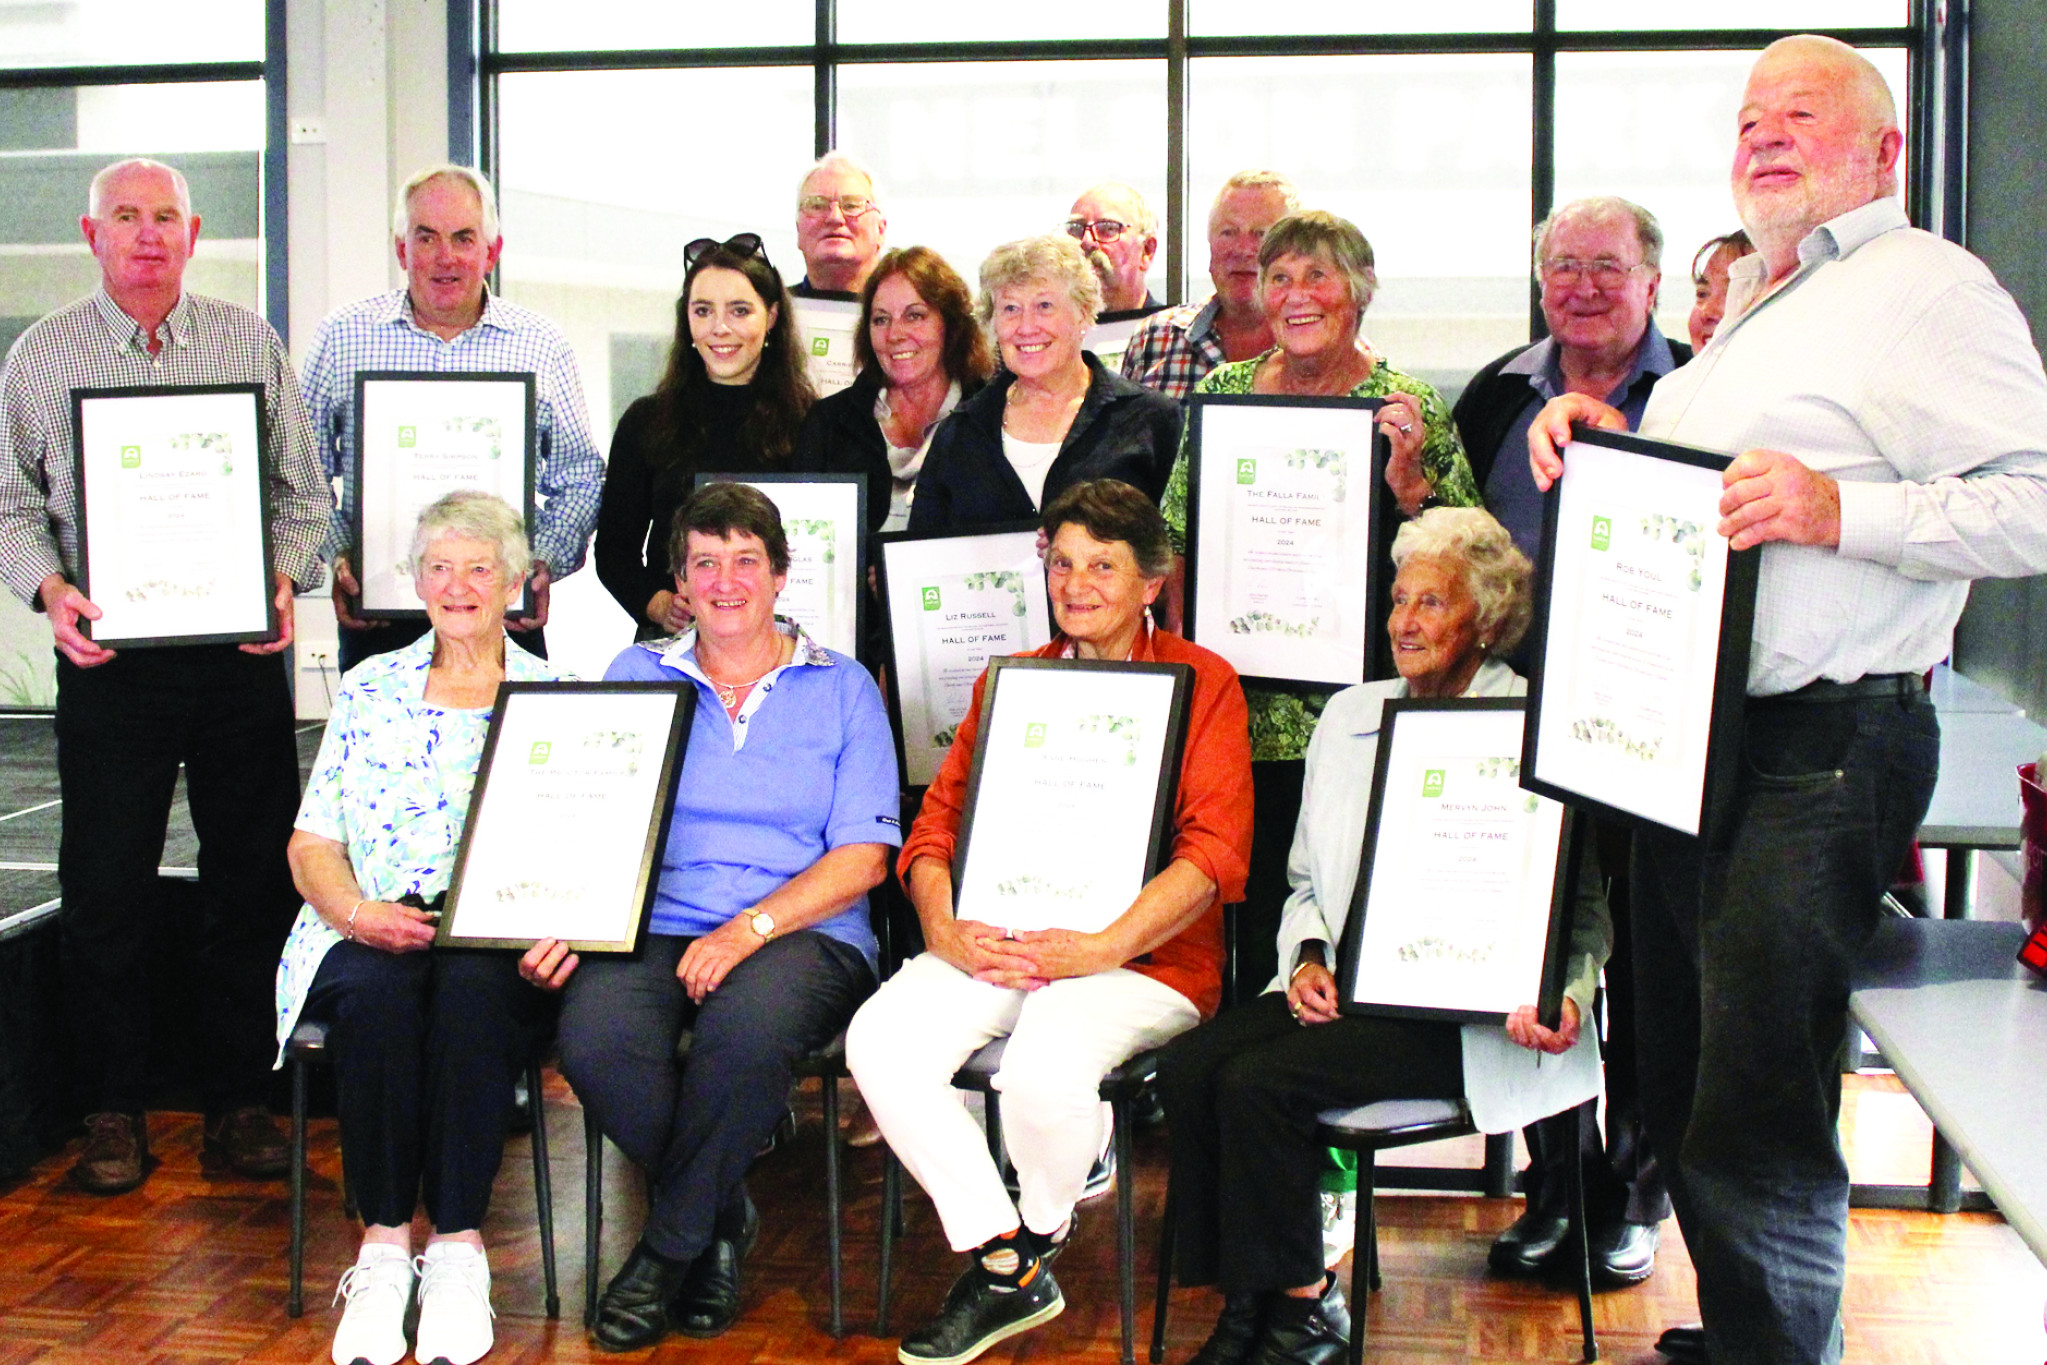 Inaugural Hall of Fame recipients of the BNGLN. (left to right) Back row: Lindsay Ezard, Greg Simpson, Steve Jesse, Glen McDonald and Peter Falla. Middle Row: Kate Douglas, Debra Douglas, Liz Russell, Alison Lipshut, Keith Rowley and Wendy Pollard (partly obscured) Front Row: Marg Proctor, Brenda Proctor, Anne Hughes and Lorraine Rowley